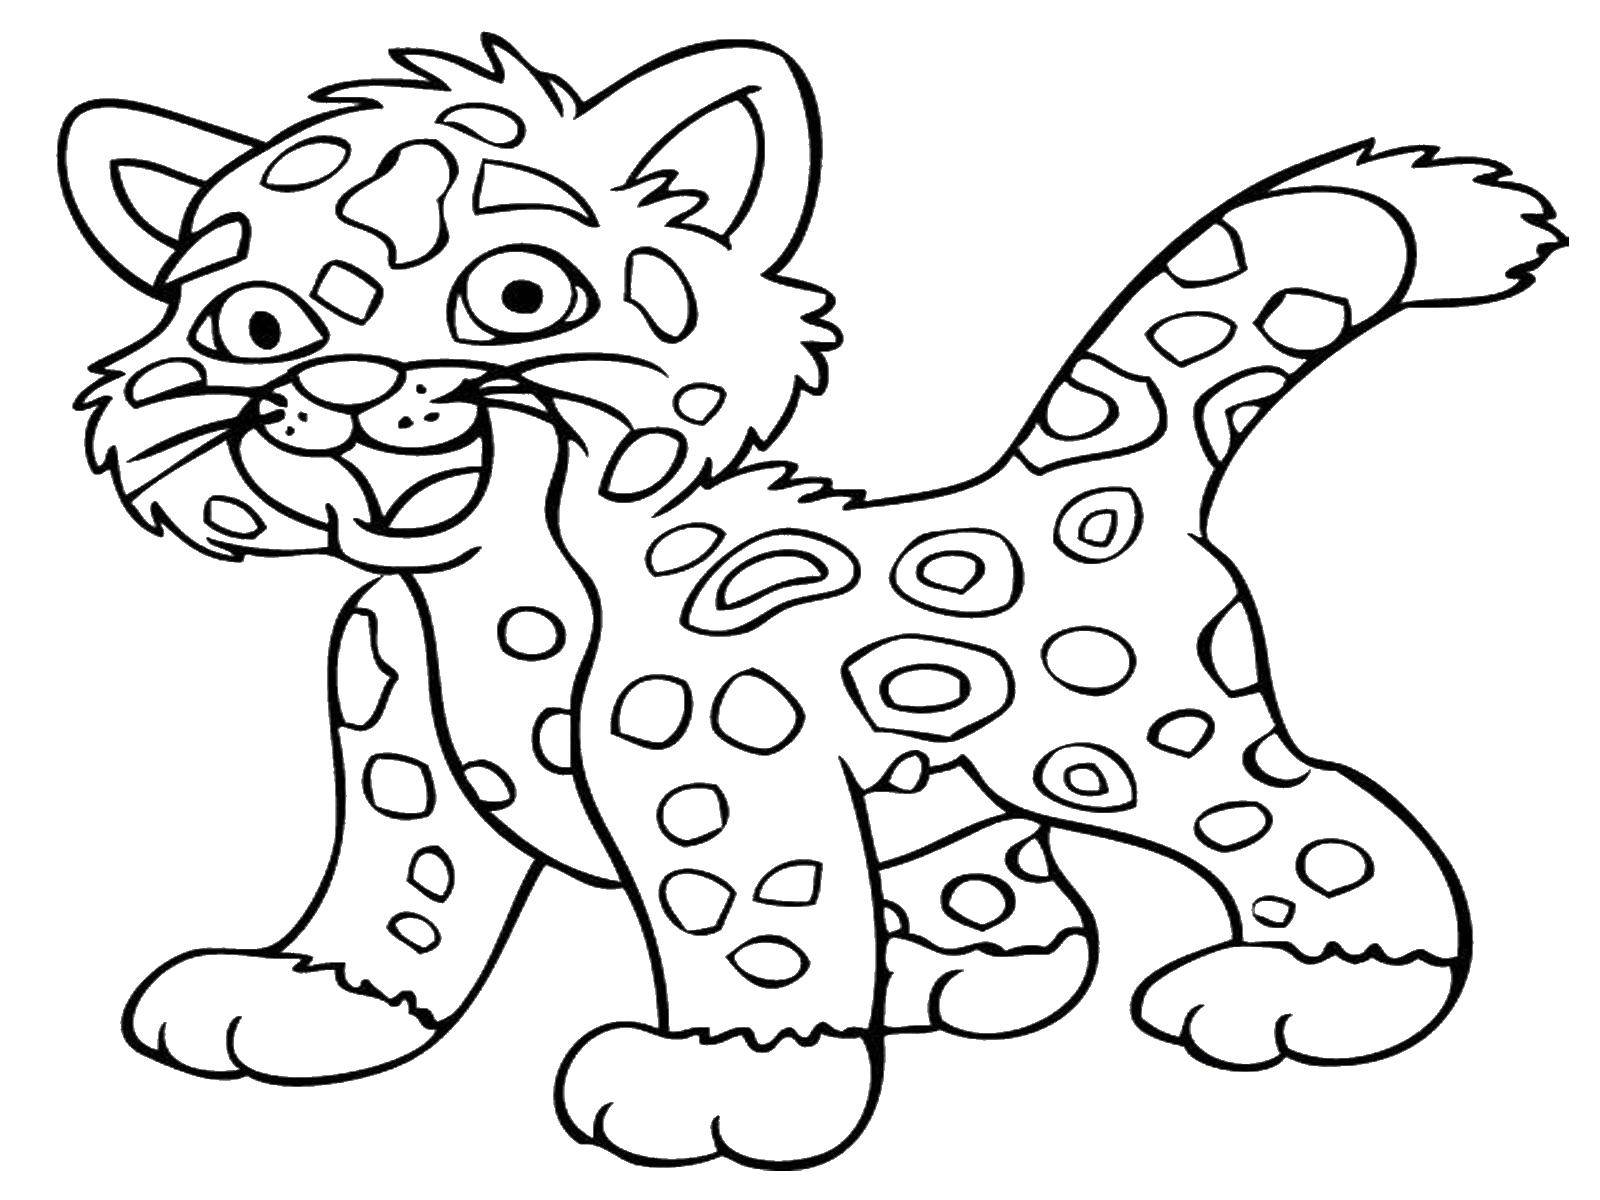 Coloring Baby leopard. Category animals. Tags:  animals, leopard, little leopard.